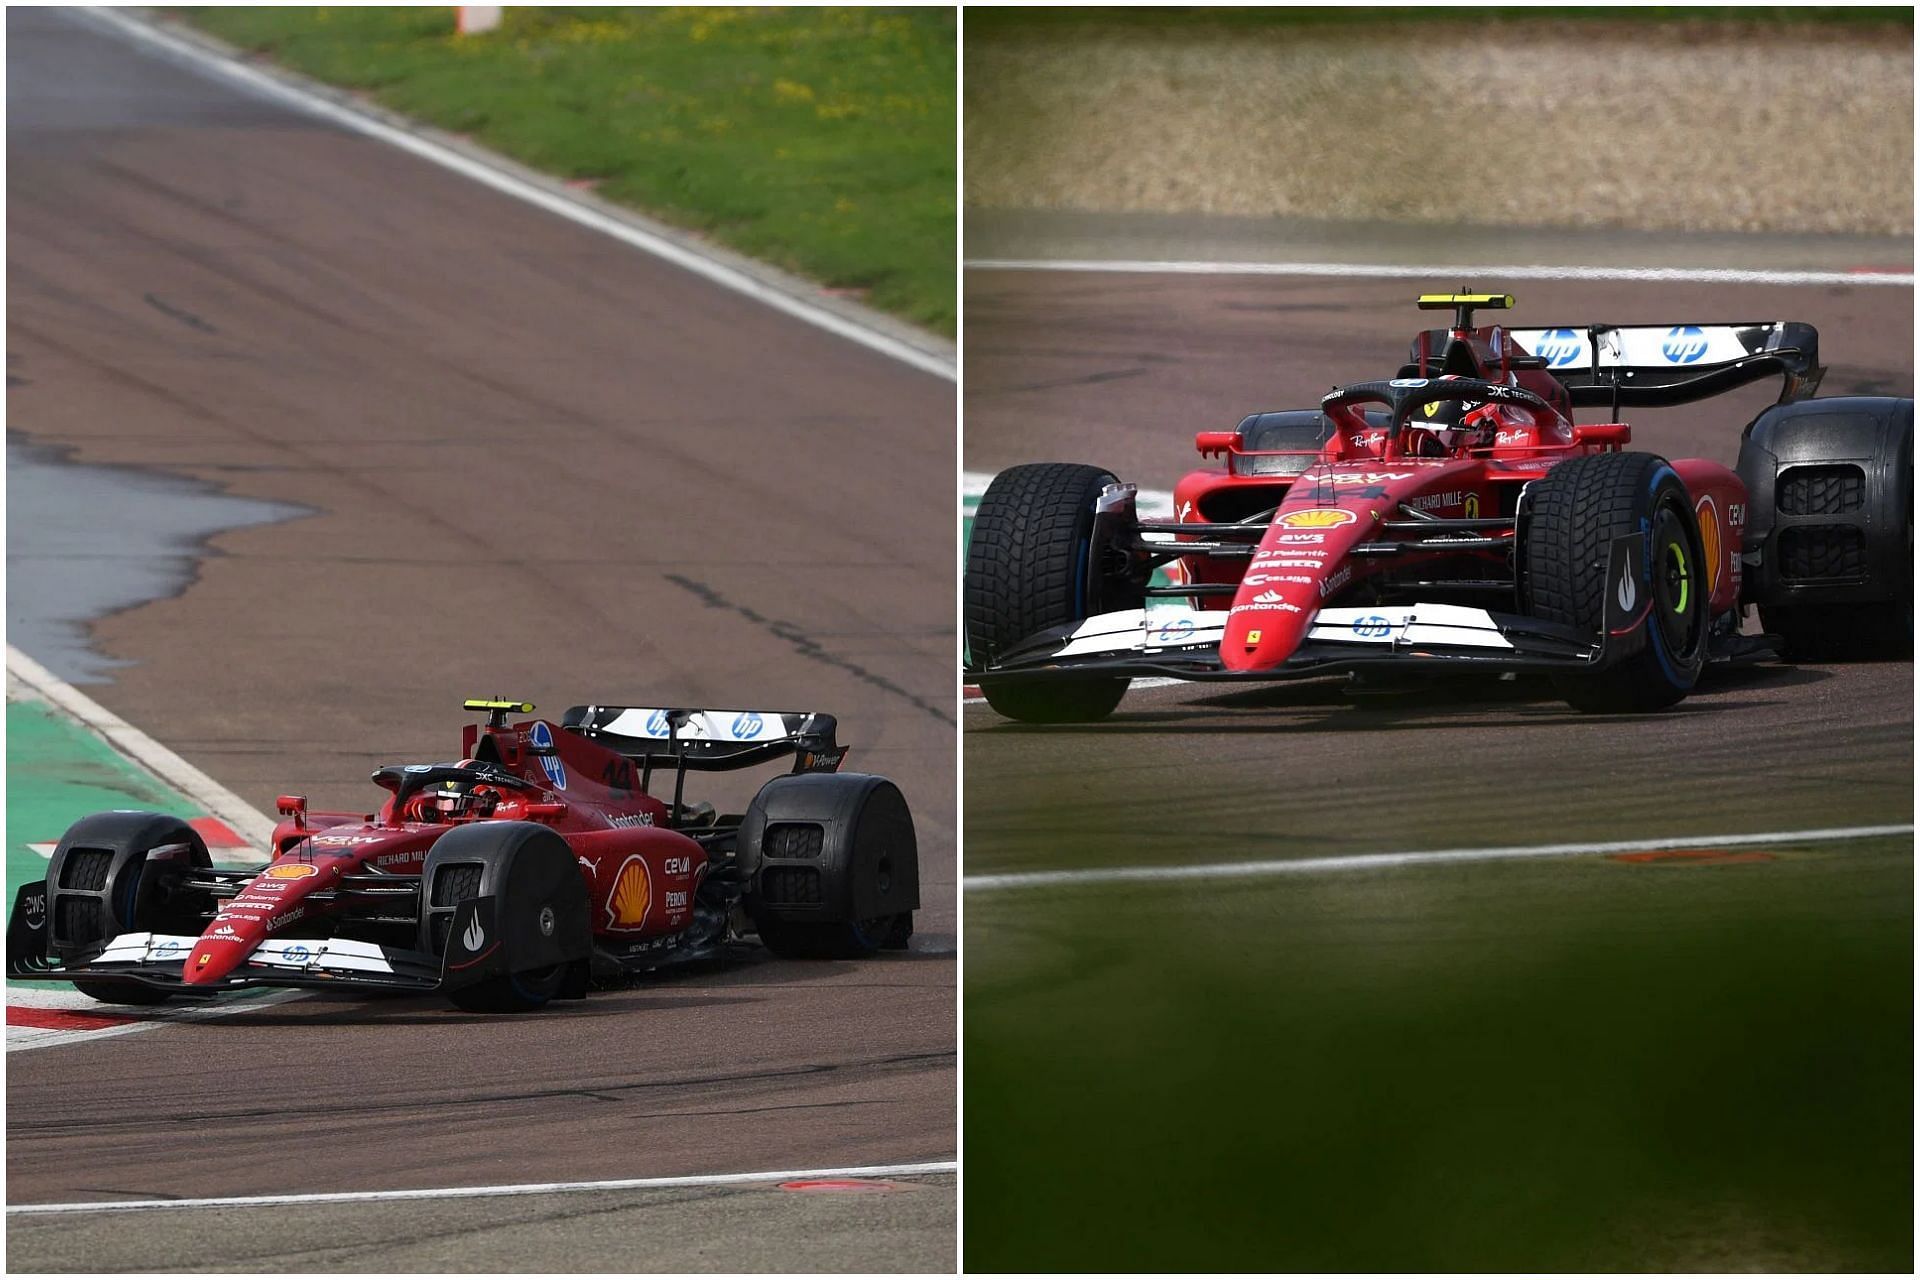 Ferrari junior drivers Arthur Leclerc and Oliver Bearman testing new spray covers and upgrades during at the Fiorano track (Collage via Sportskeeda)